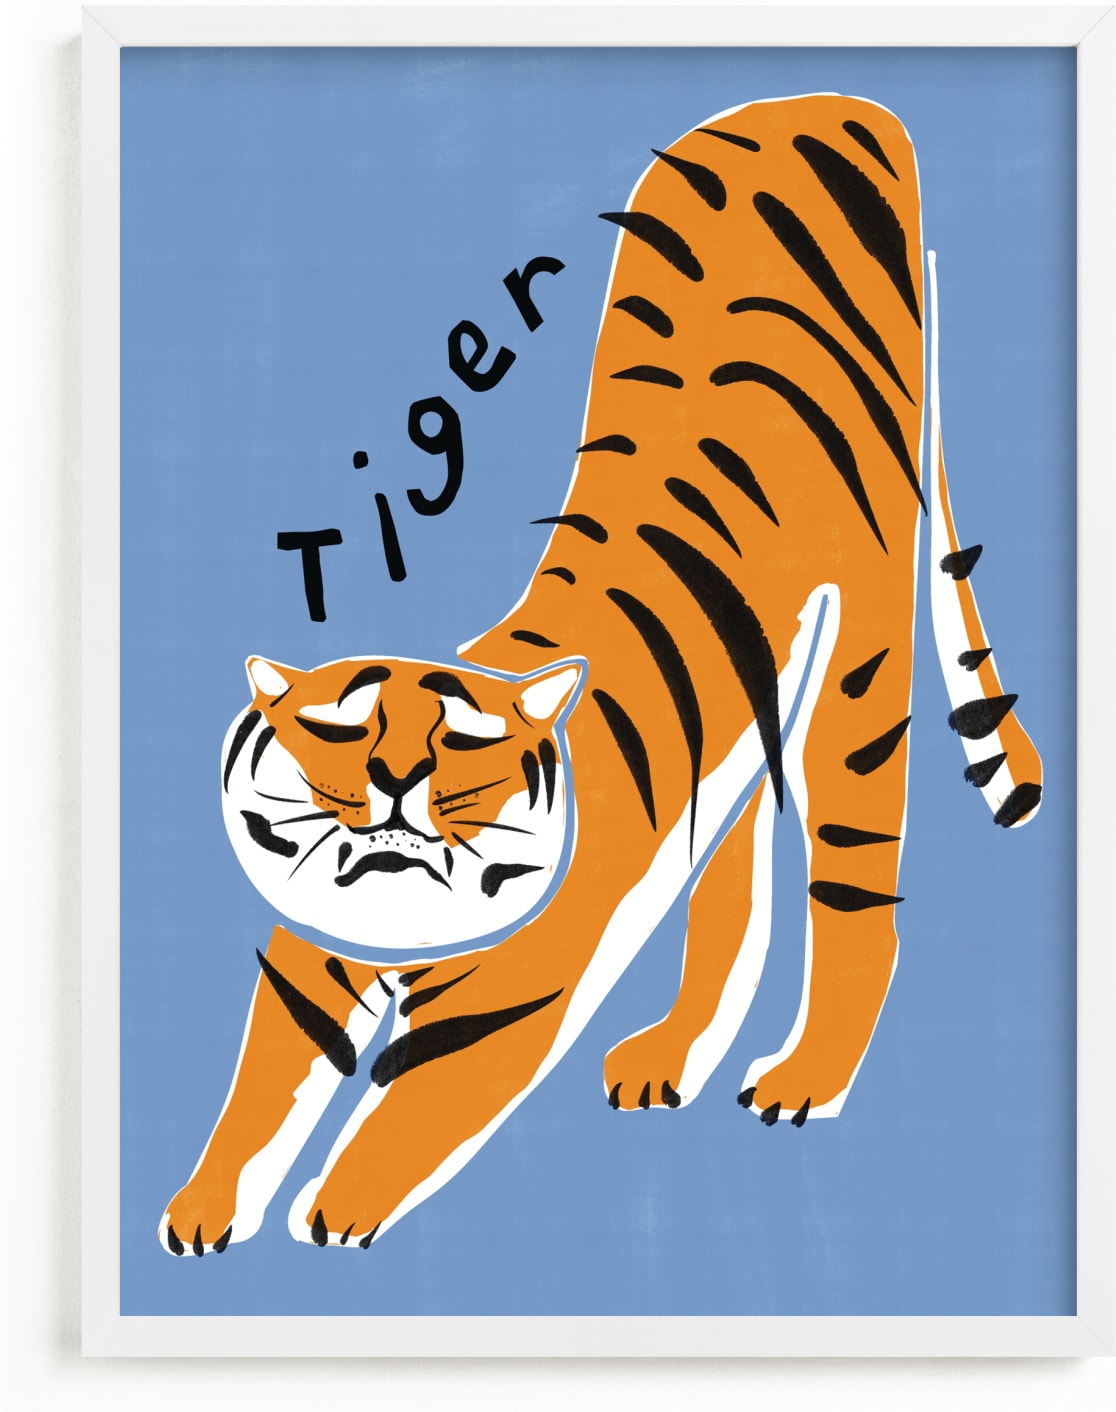 This is a blue art by Inkblot Design called Tiger Yoga.